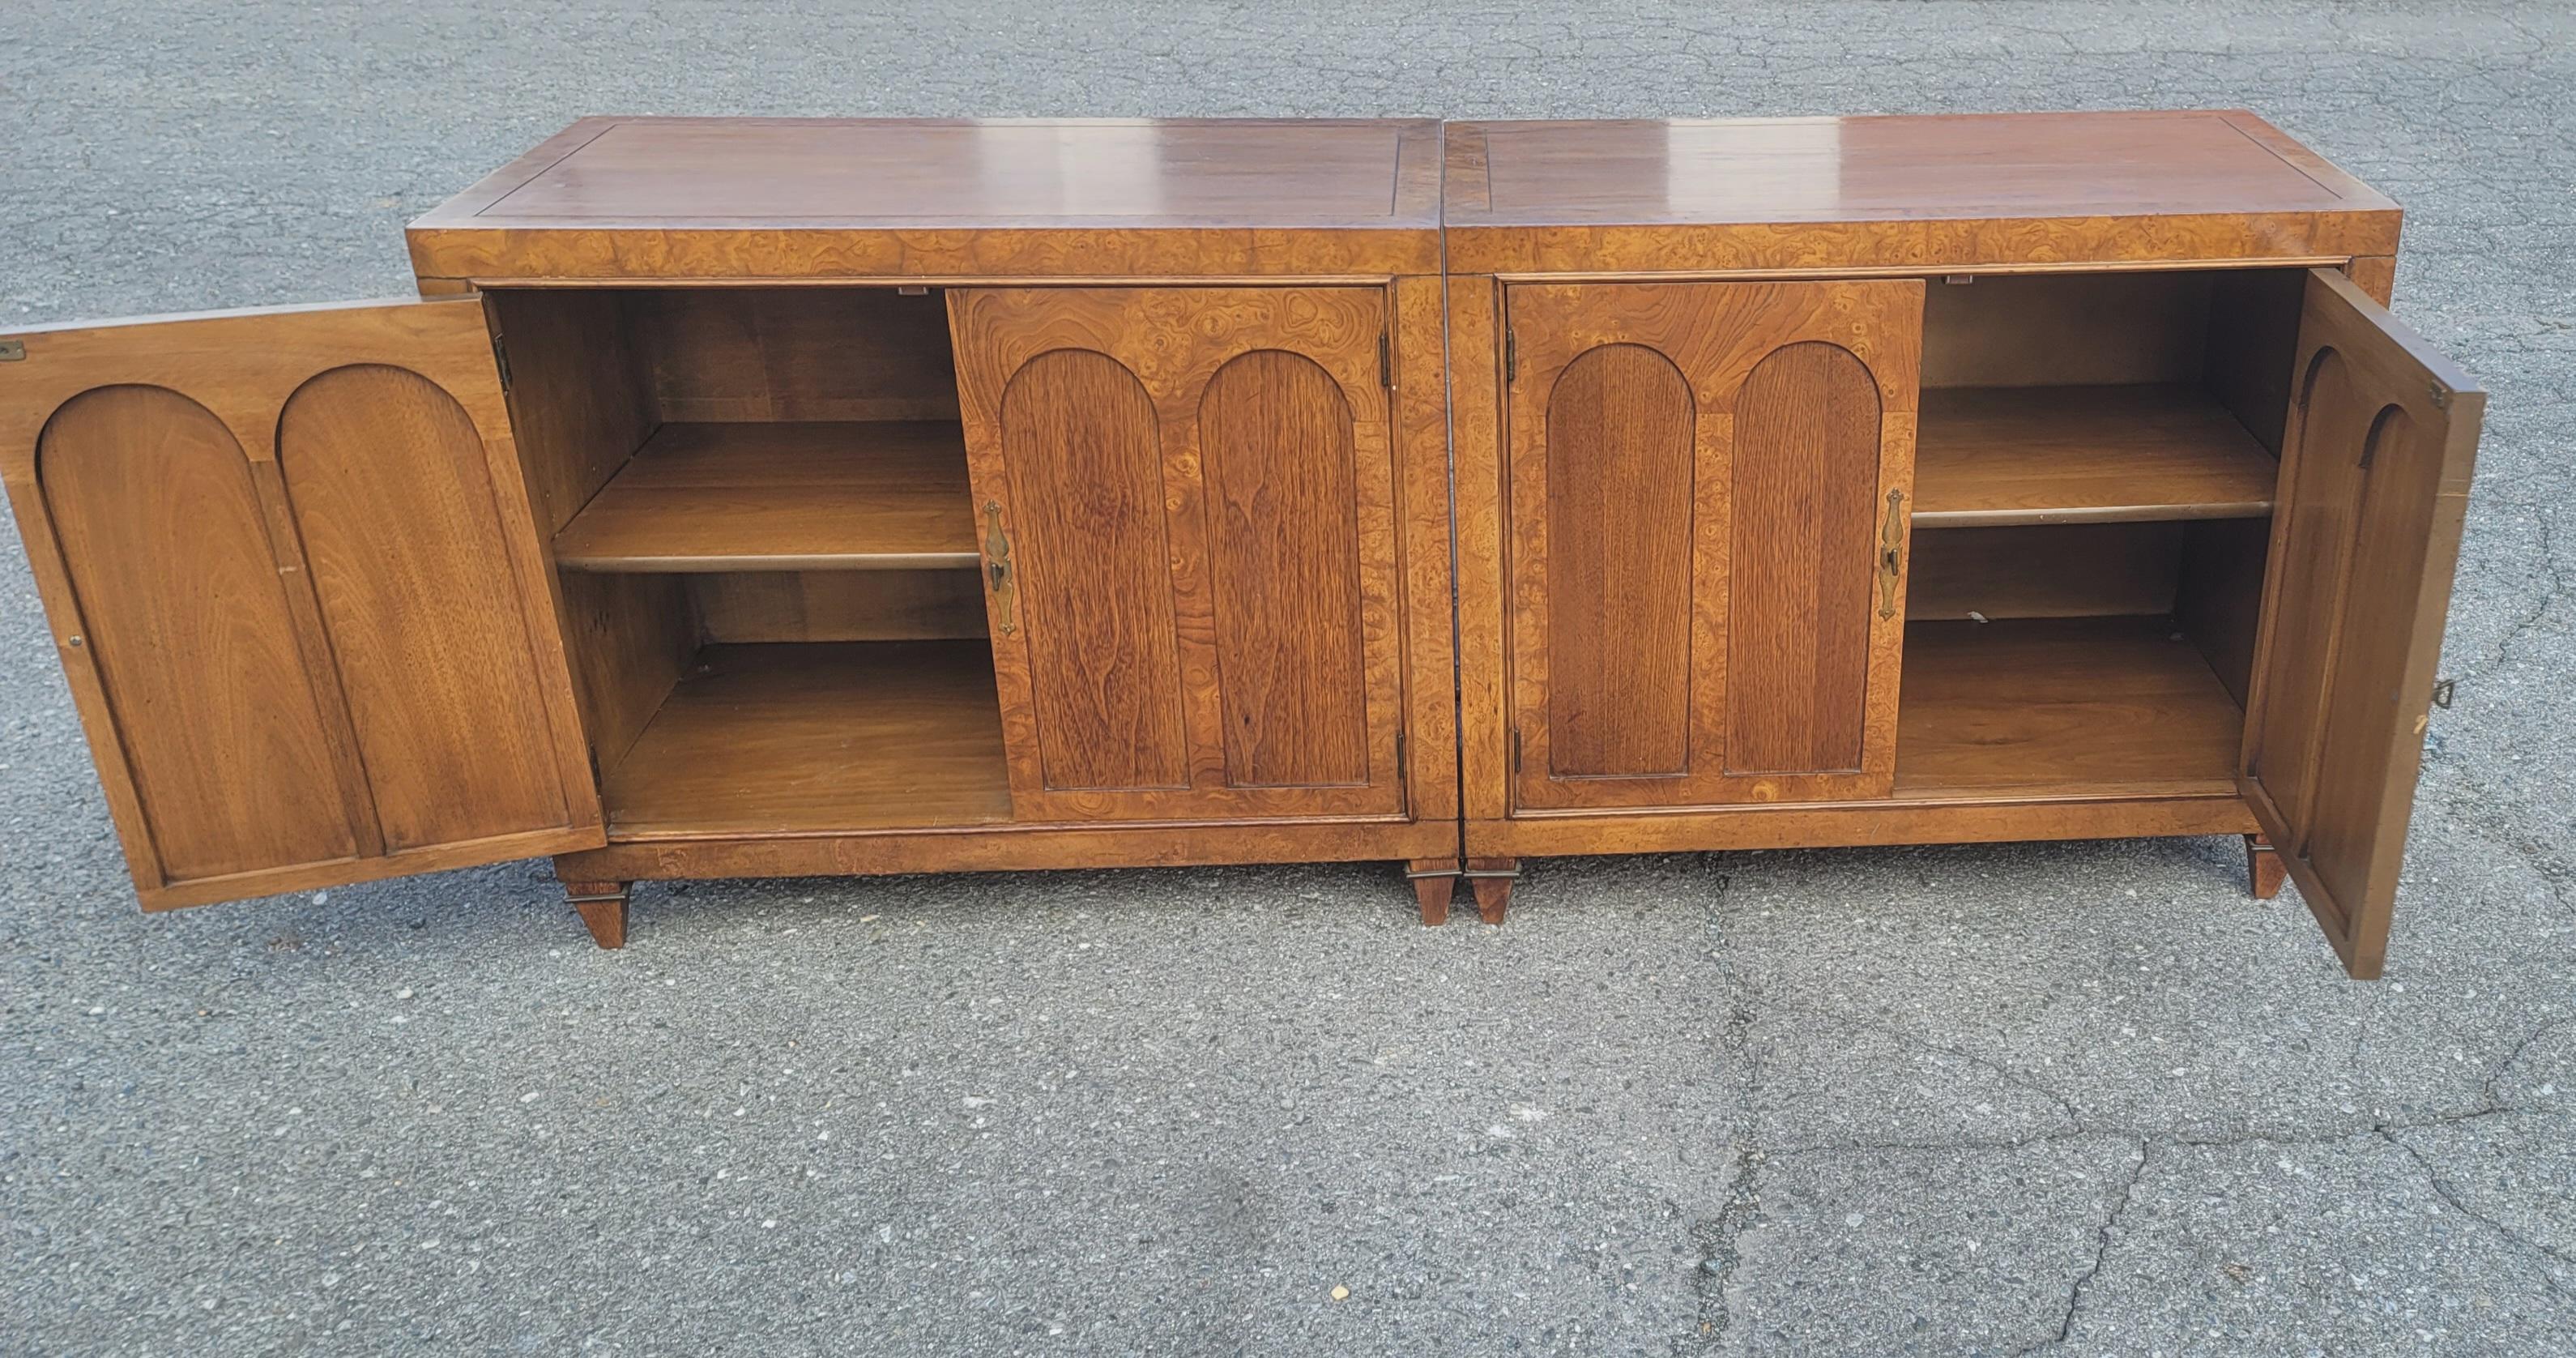 Hardwood Pair of Mastercraft Burled and Walnut Colonnade Cabinets Credenza Buffet Server For Sale